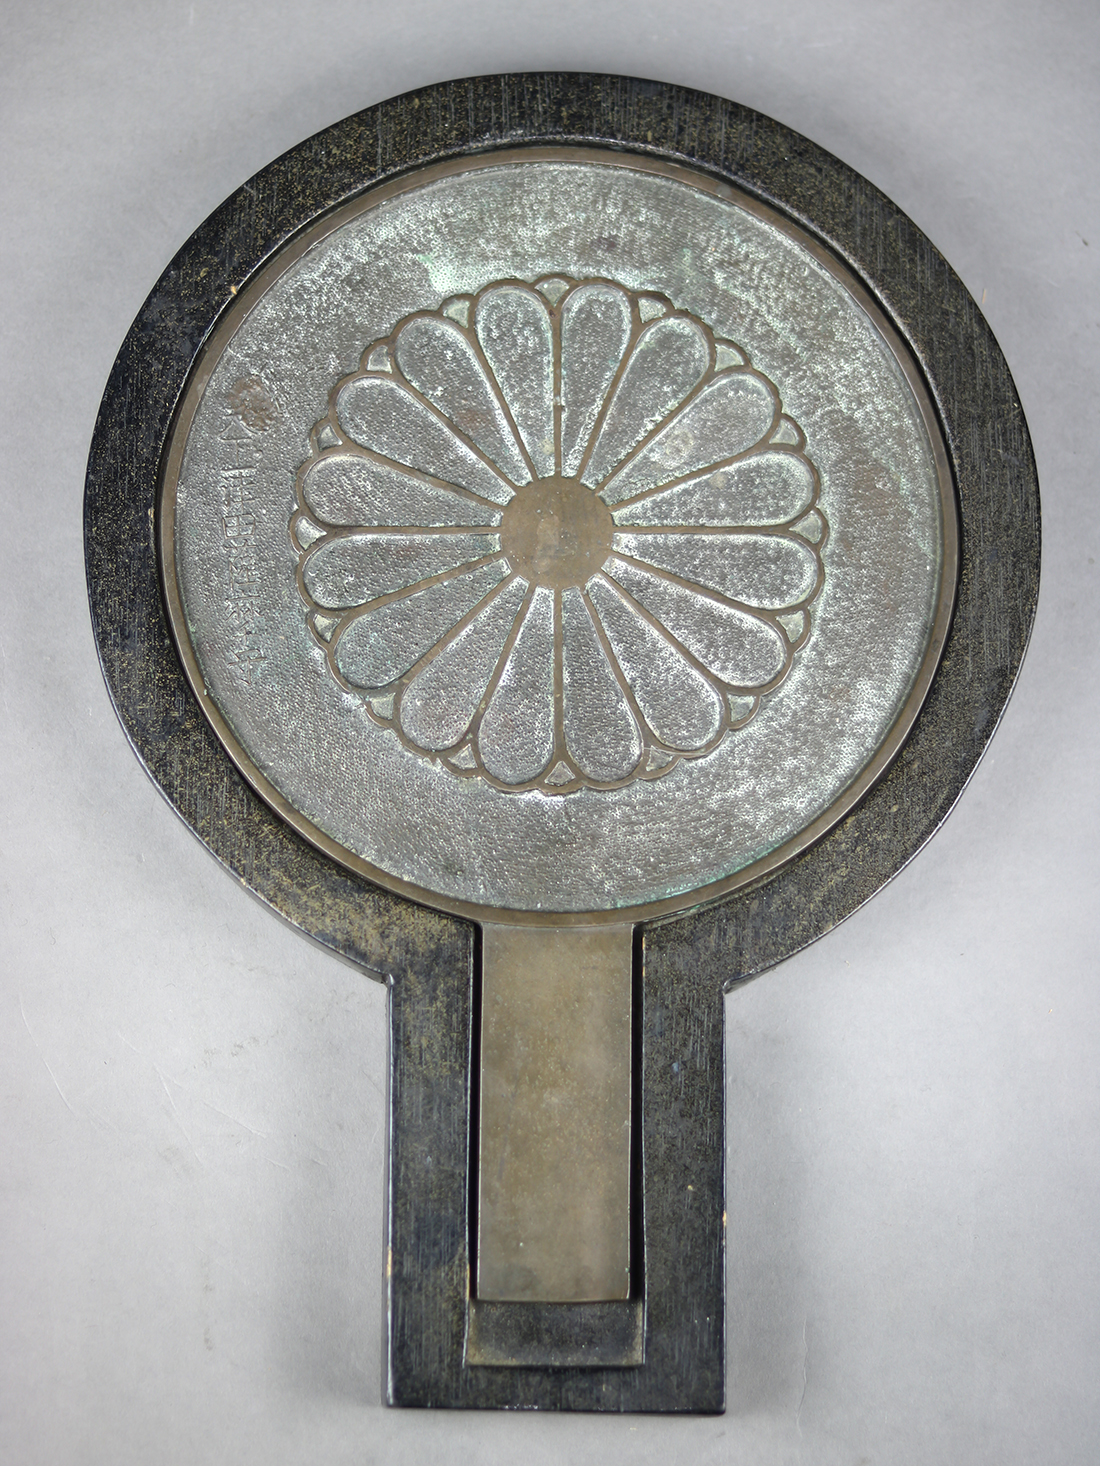 Japanese bronze mirror with wooden case, with a molded imperial 16-petal chrysanthemum crest,